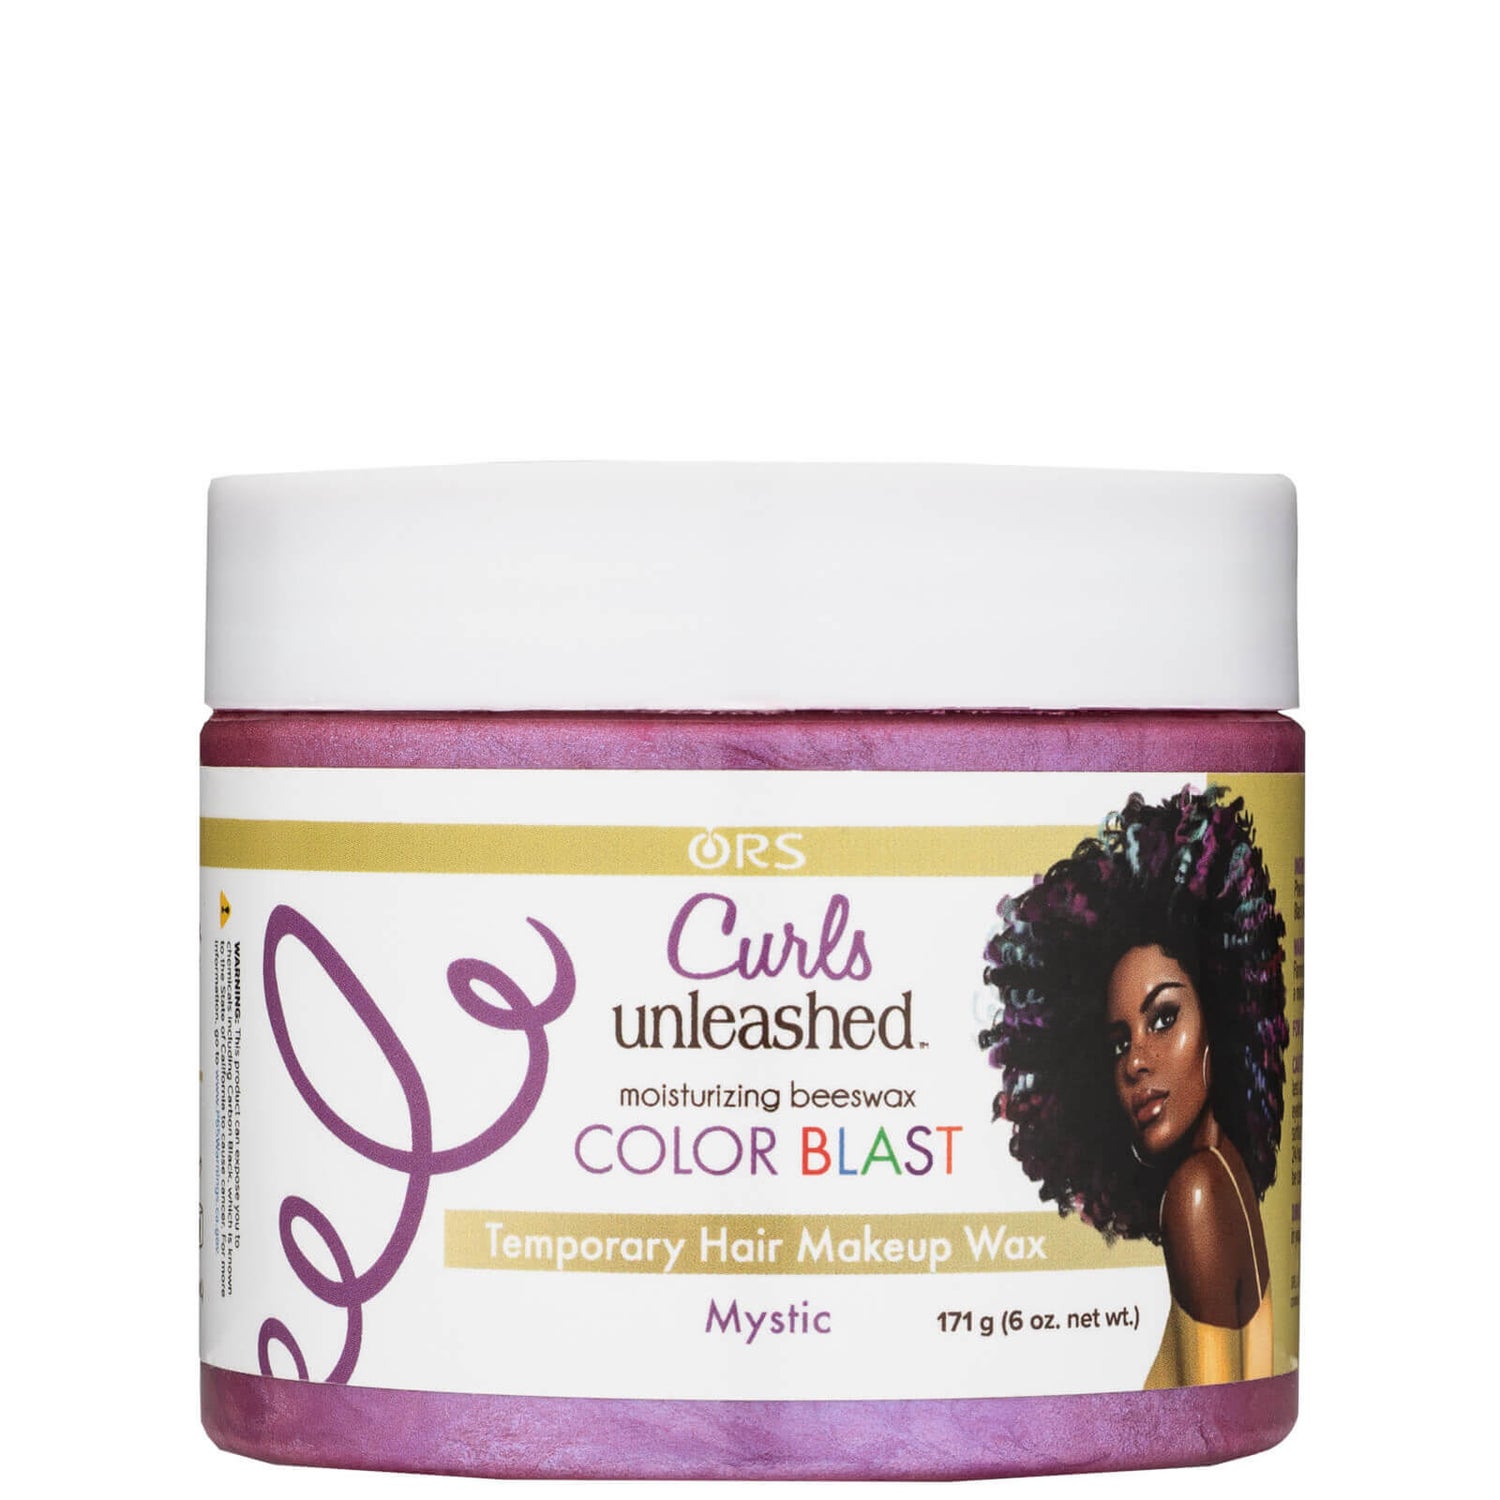 ORS Curls Unleashed Colour Blast Temporary Hair Makeup Wax - Mystic